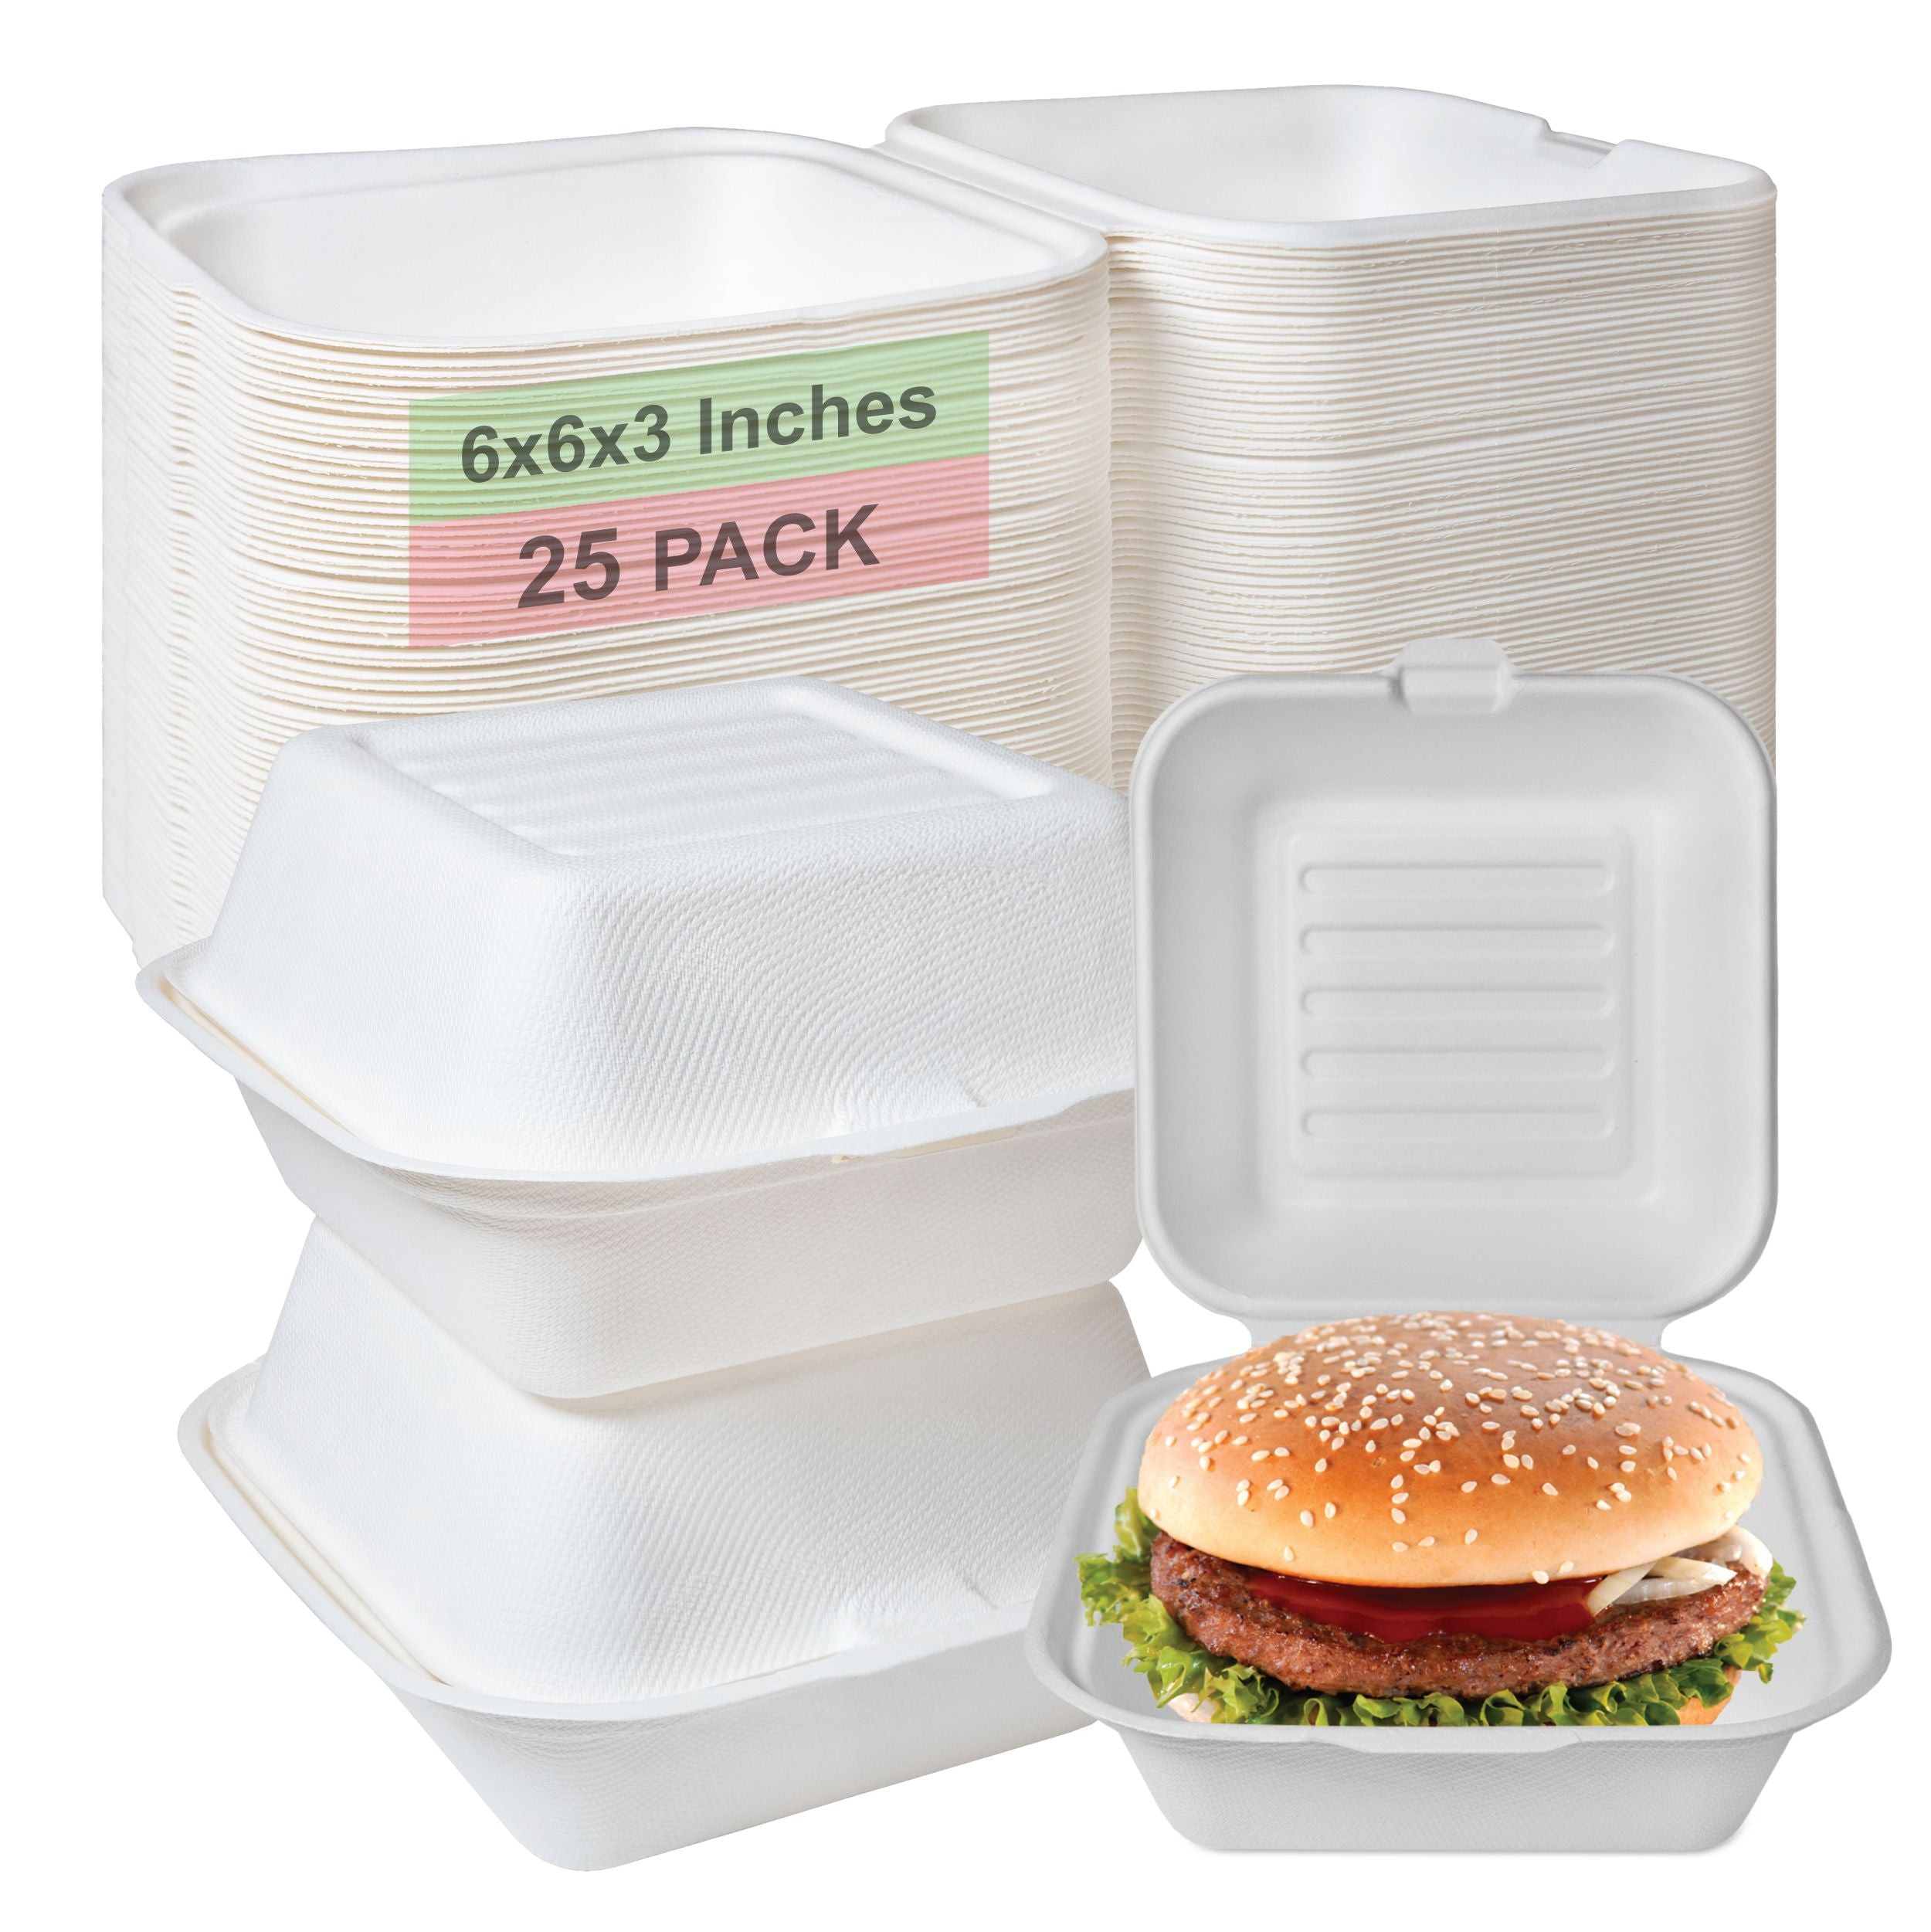 Compostable Square Hinged Clamshell Food TakeOut Box, Heavy Duty Disposable ToGo Containers with Lids, Biodegradable for Restaurants, Food Trucks